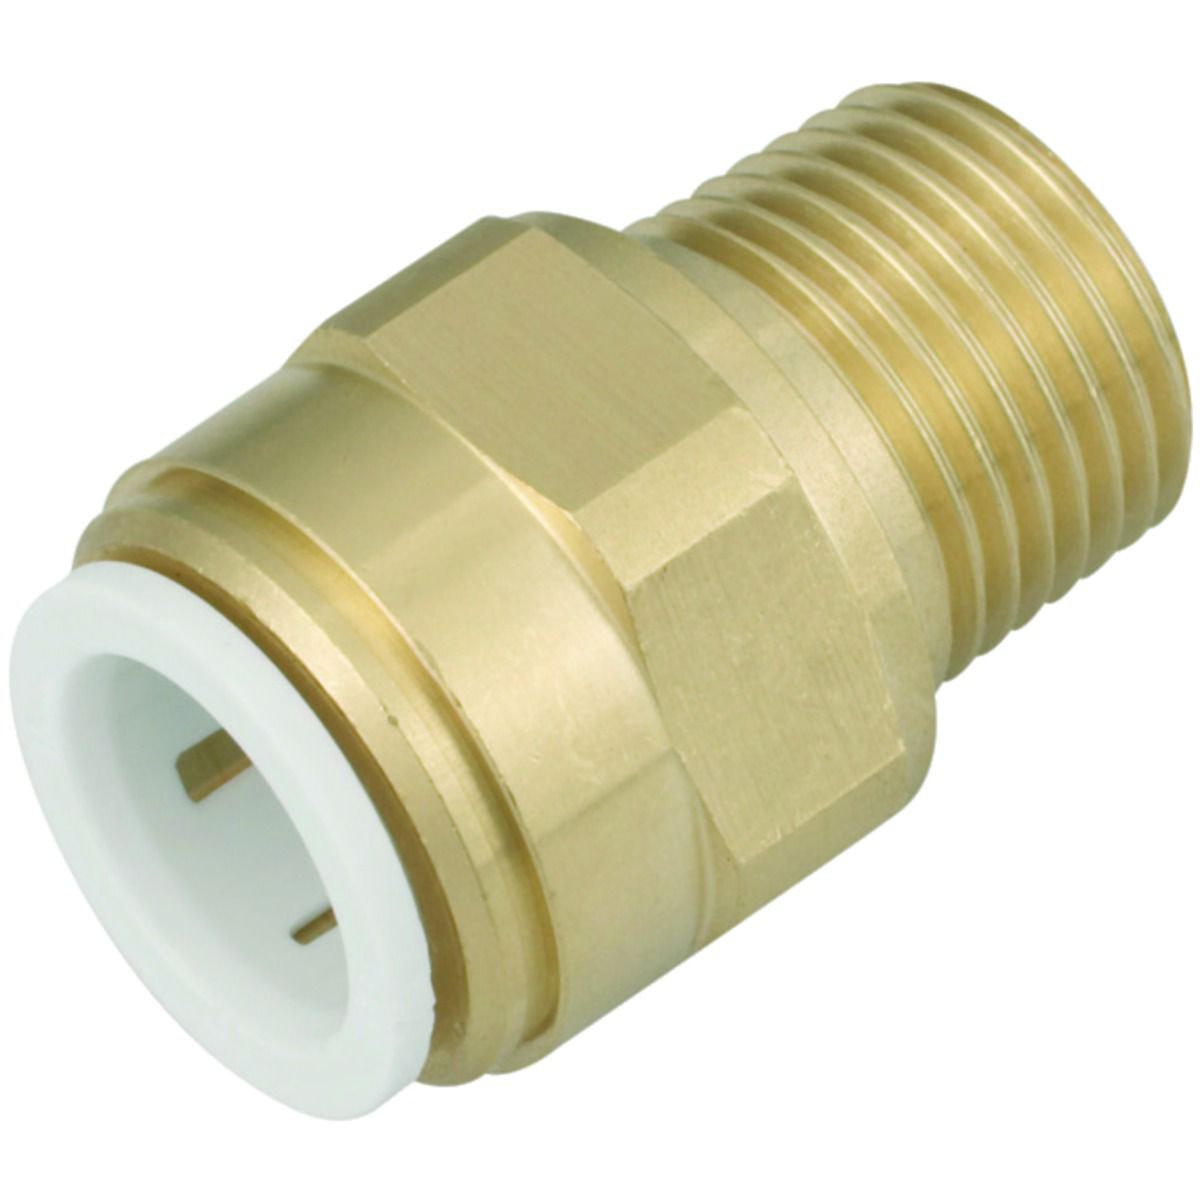 Image of John Guest Speedfit 15MC(1/2)P Cylinder Connector Male - Brass 12 x 15mm